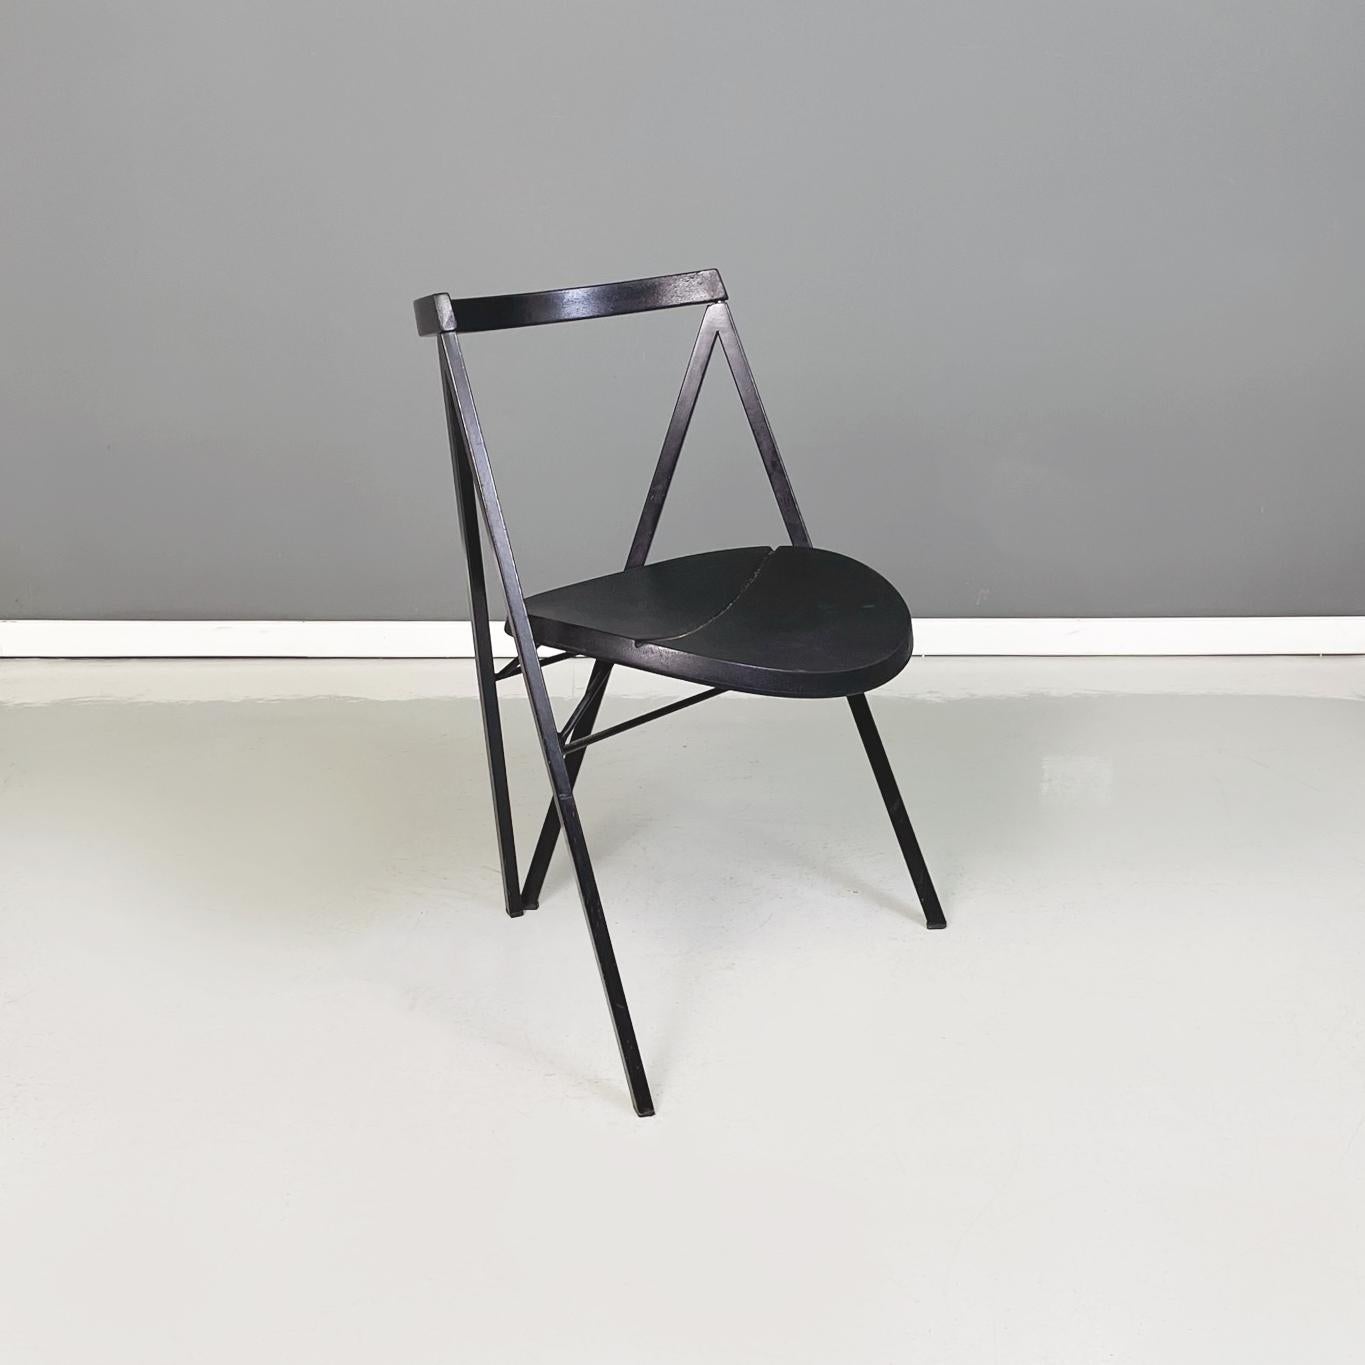 Italian modern Black metal and rubber round Chair by Zeus, 1990s
Chair with round seat in black rubber. The structure has a square section in matt black painted metal. The curved backrest has a rectangular section black rubber coating. The hind